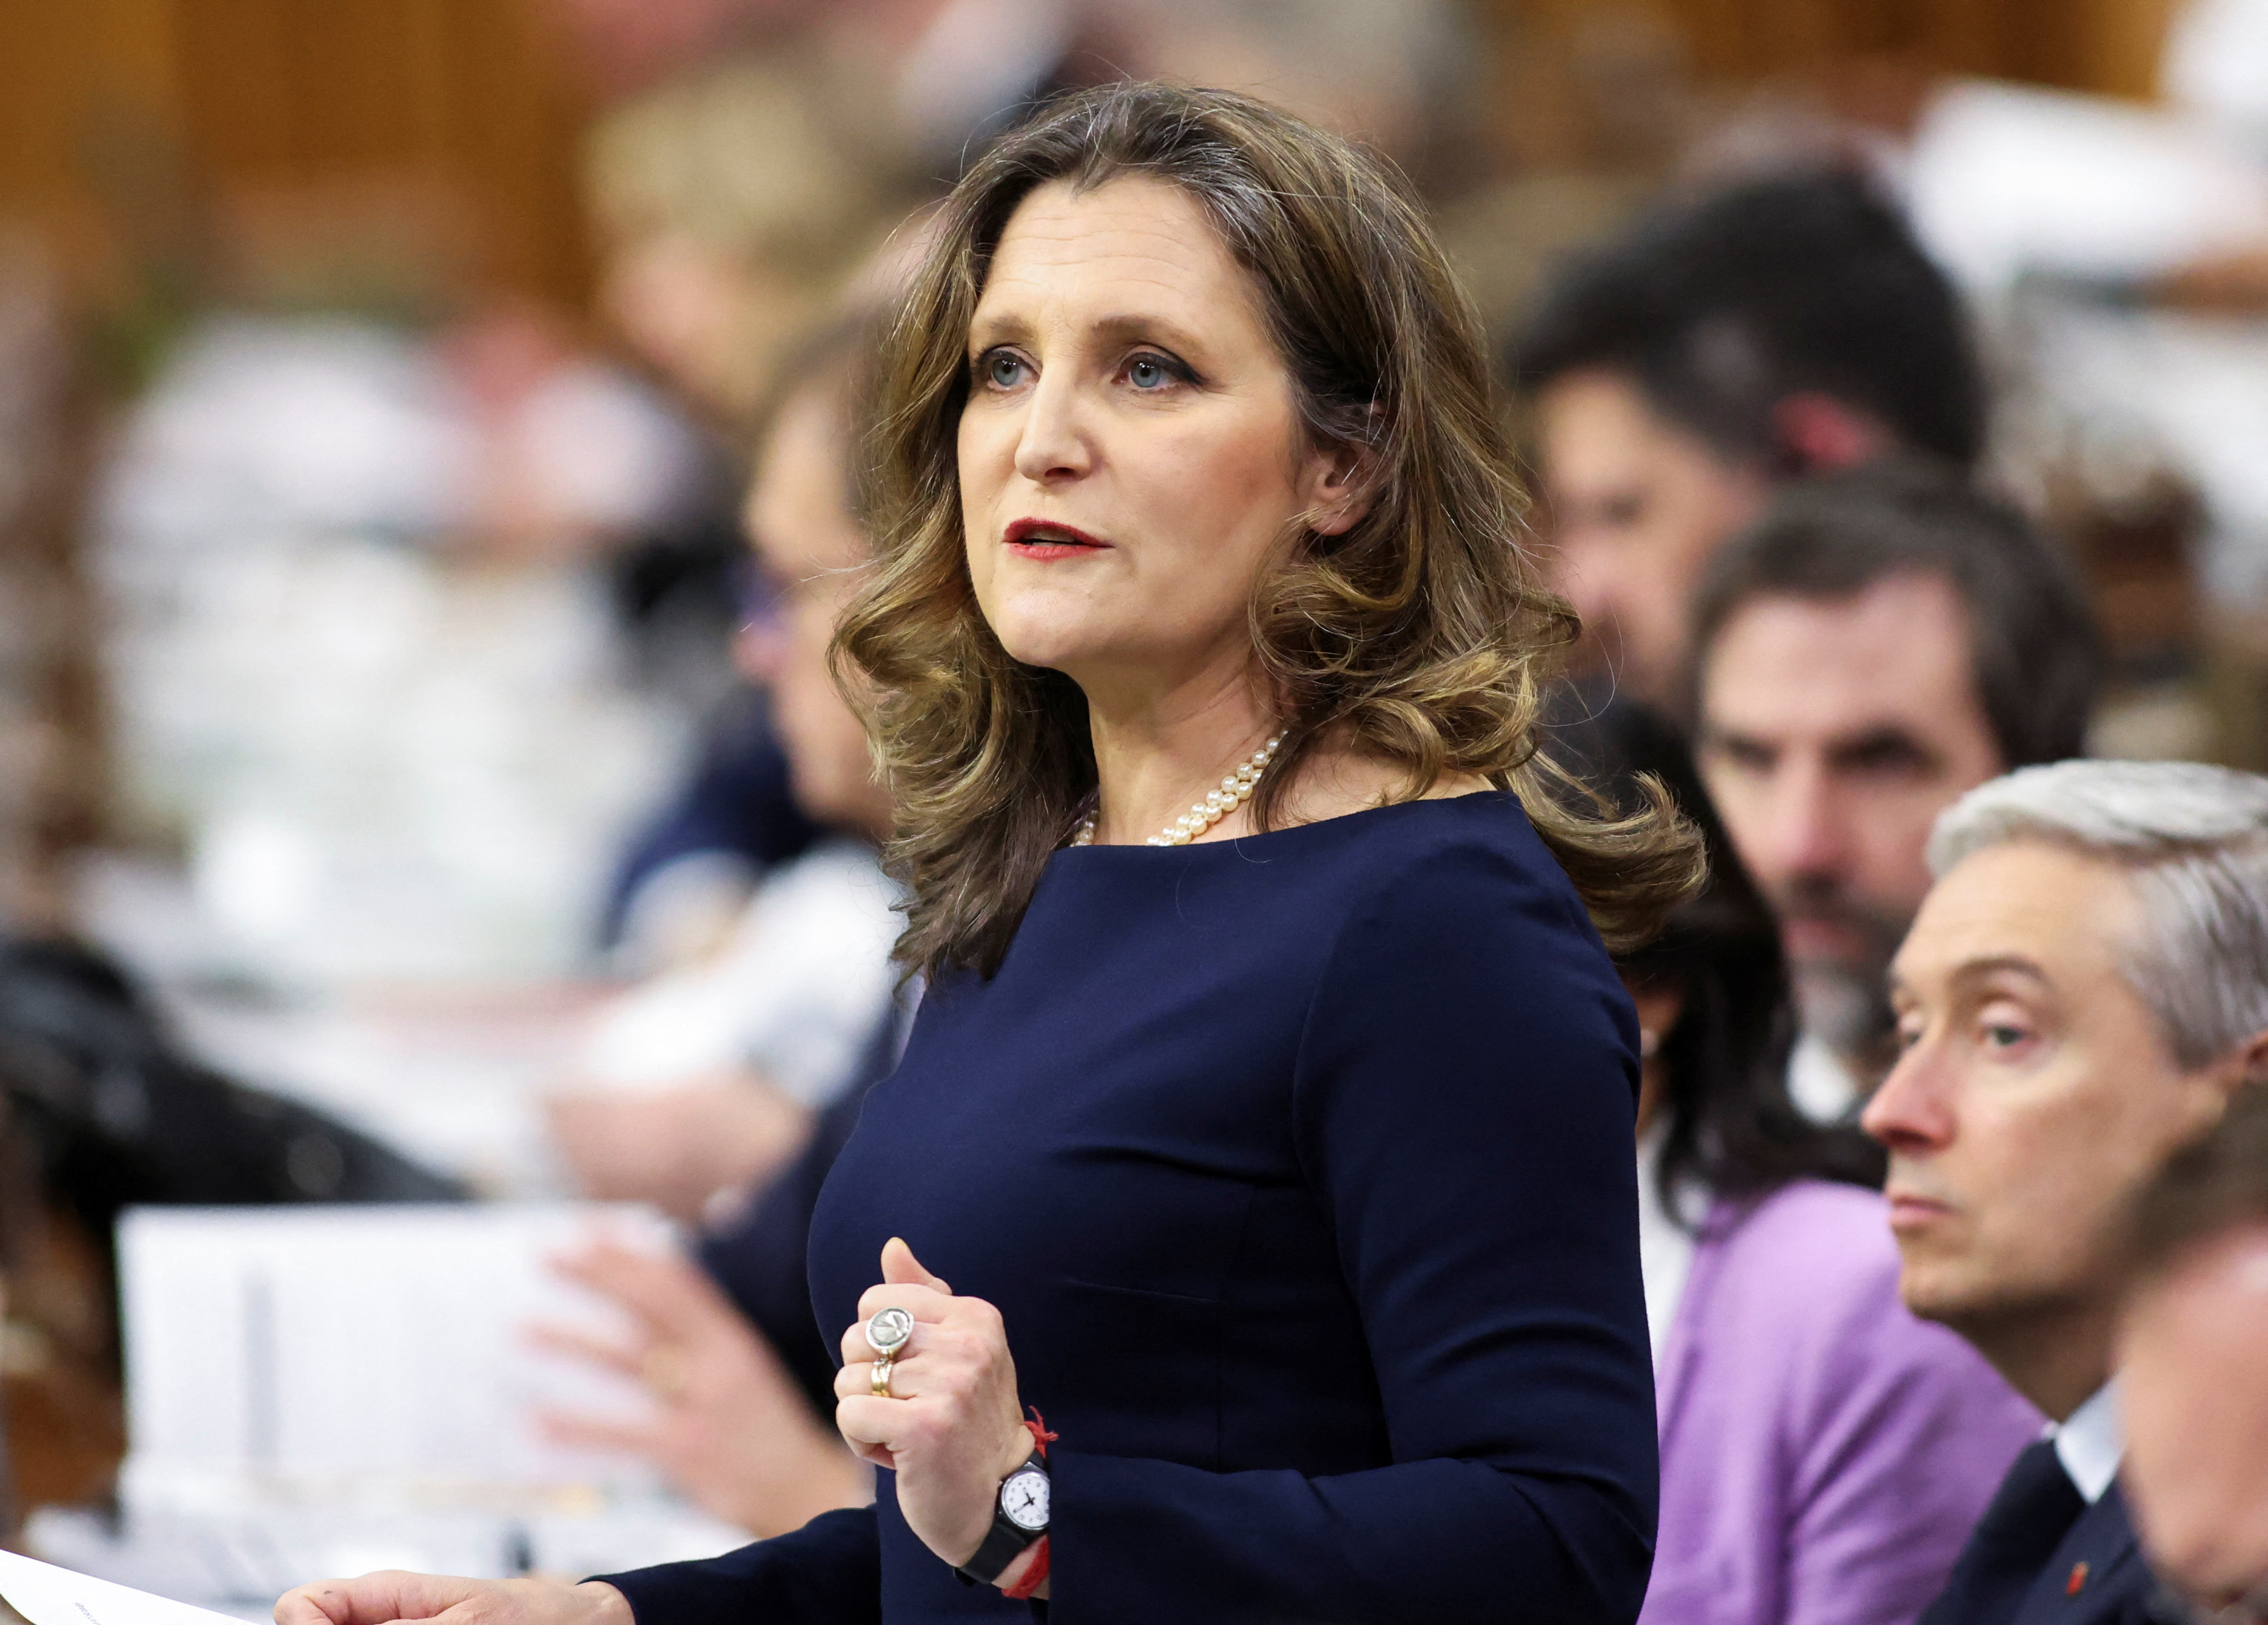 Canada's Deputy Prime Minister and Minister of Finance Chrystia Freeland presents the federal government budget for fiscal year 2024-25, in the House of Commons on Parliament Hill in Ottawa